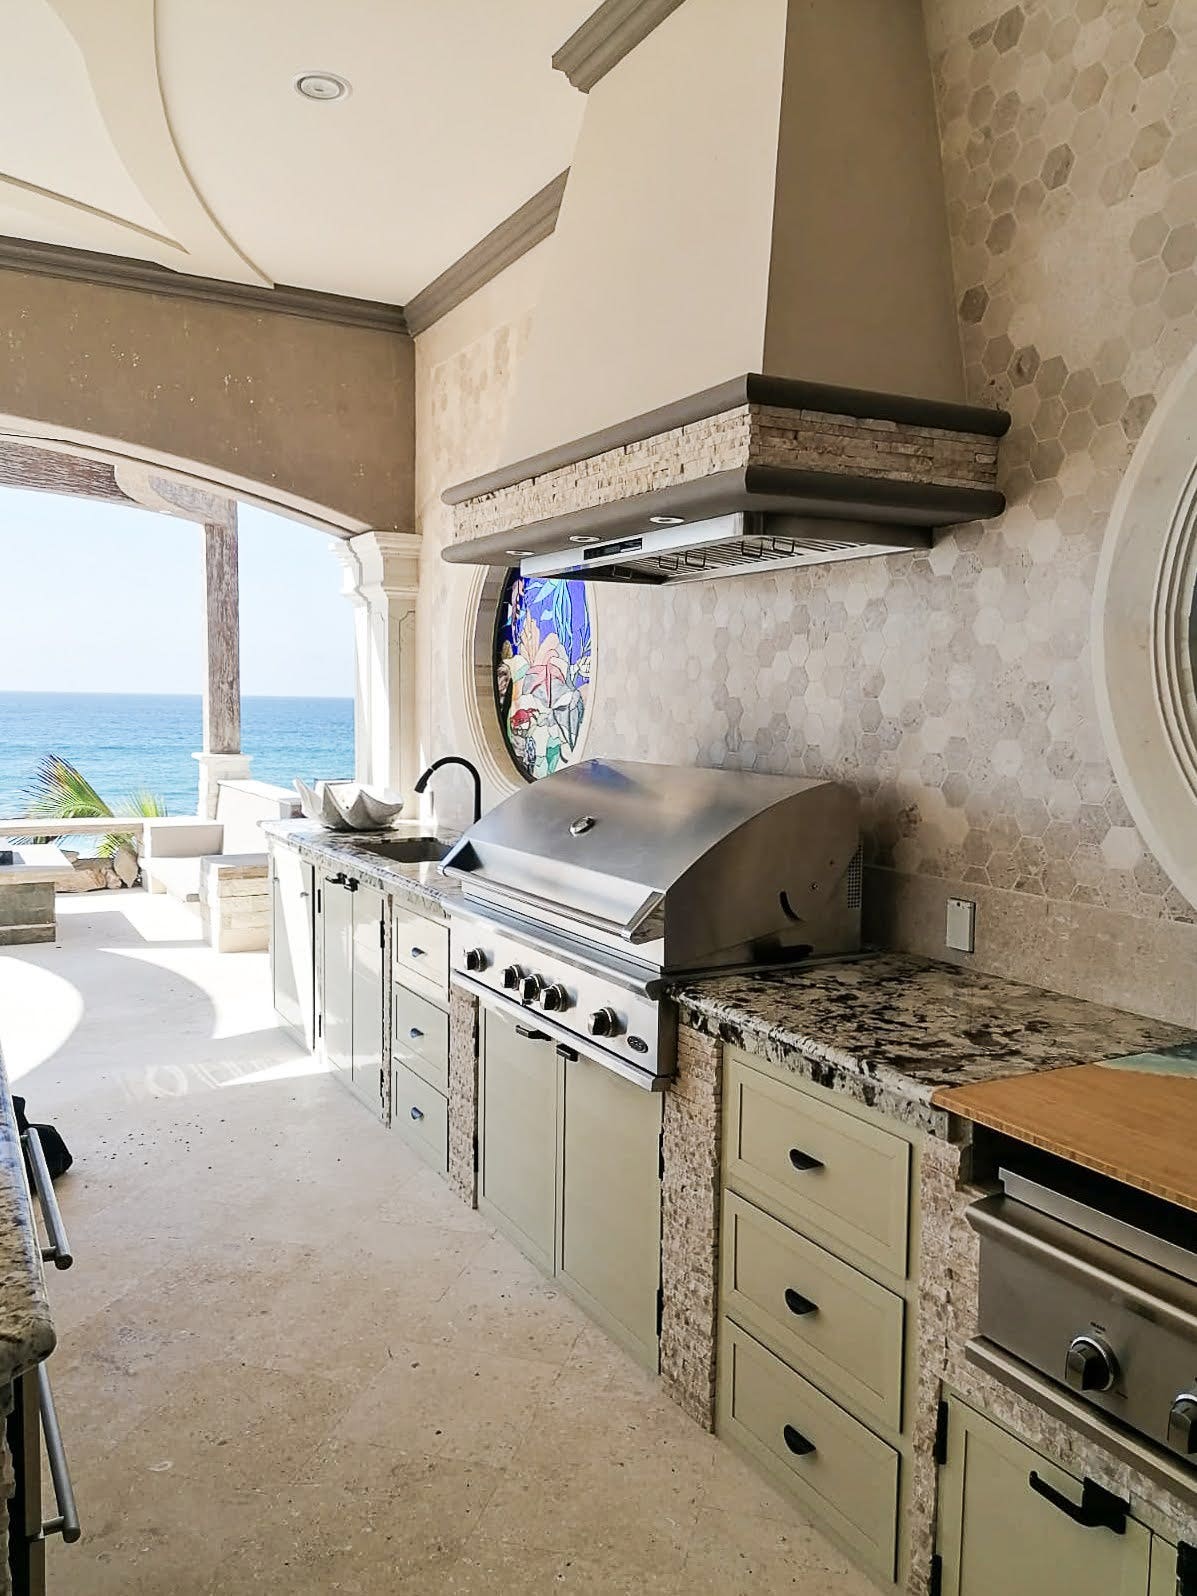 Seaside Kitchen Escape: Custom Proline PLFW 129 hood with stone arch creates a luxurious feel in this outdoor kitchen. Mosaic backsplash and calming colors evoke a Mediterranean vibe. Perfect for seaside cooking and entertaining. - Proline Range Hoods - prolinerangehoods.com 